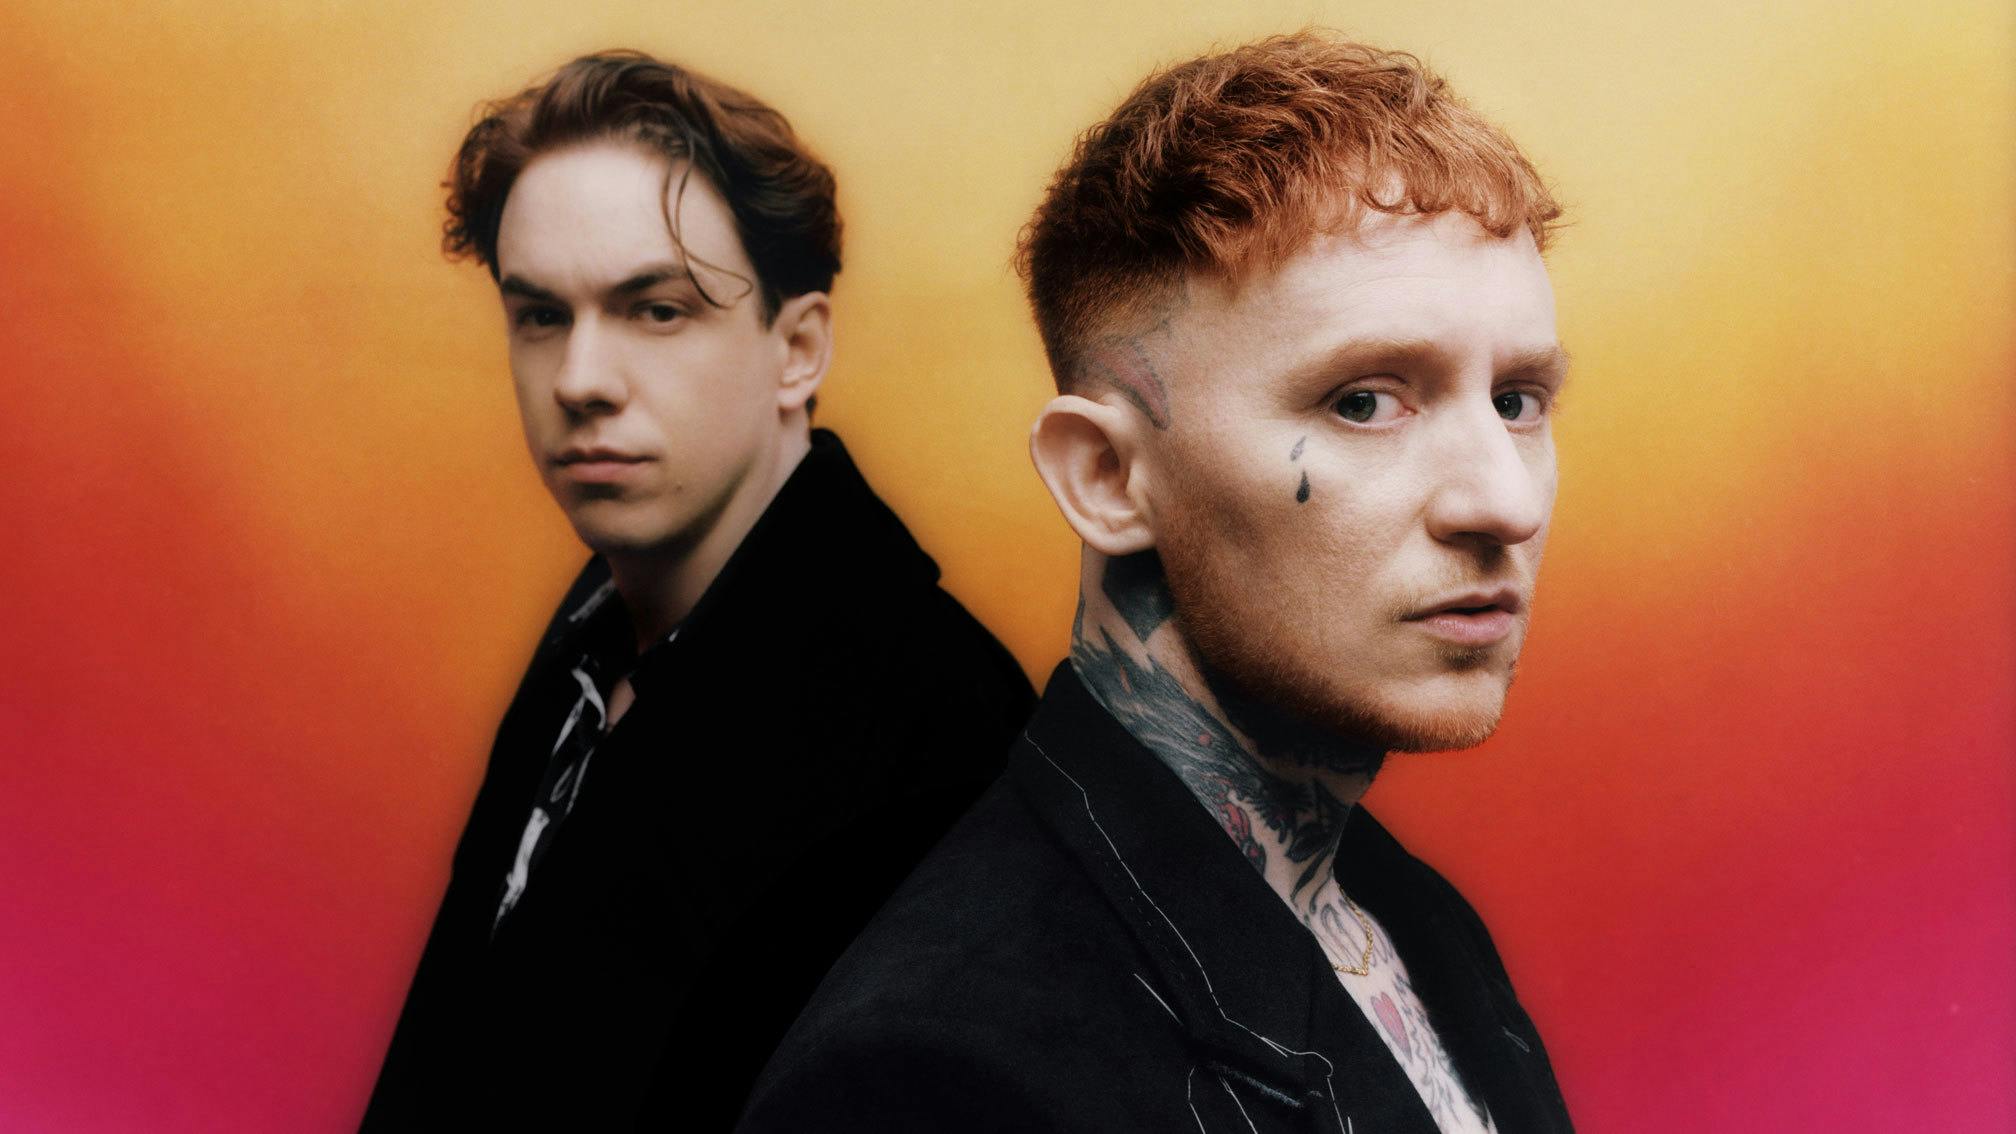 Frank Carter & The Rattlesnakes to play on Rage Against The Machine’s Rock en Seine date